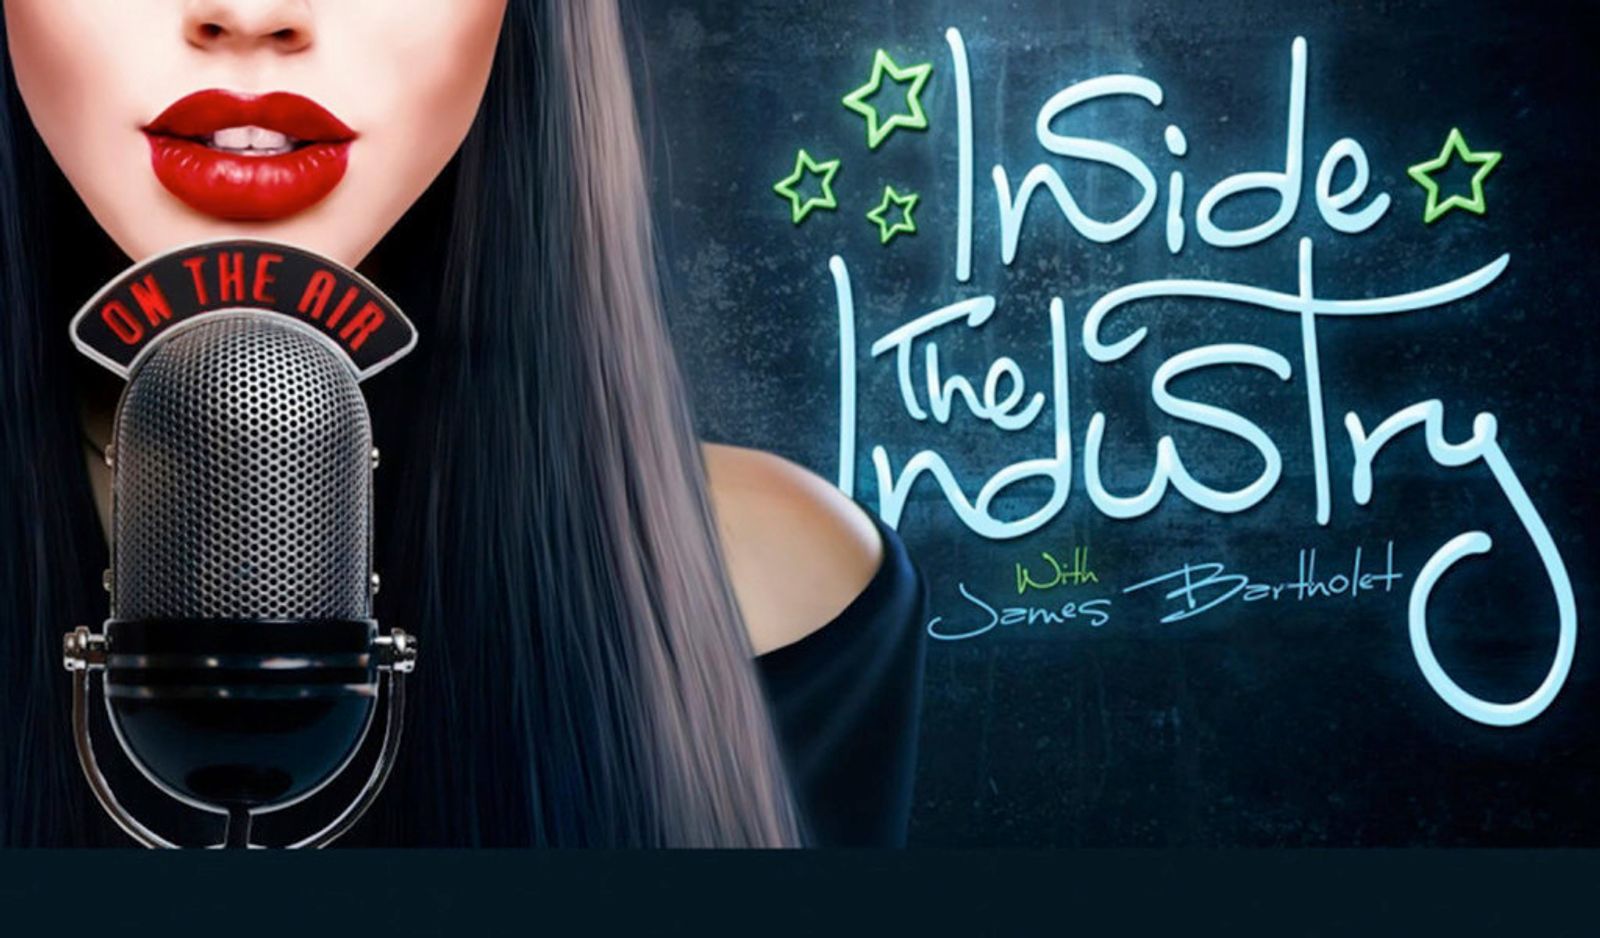 Holly Hendrix, Kristina Rose on 'Inside the Industry' Wednesday